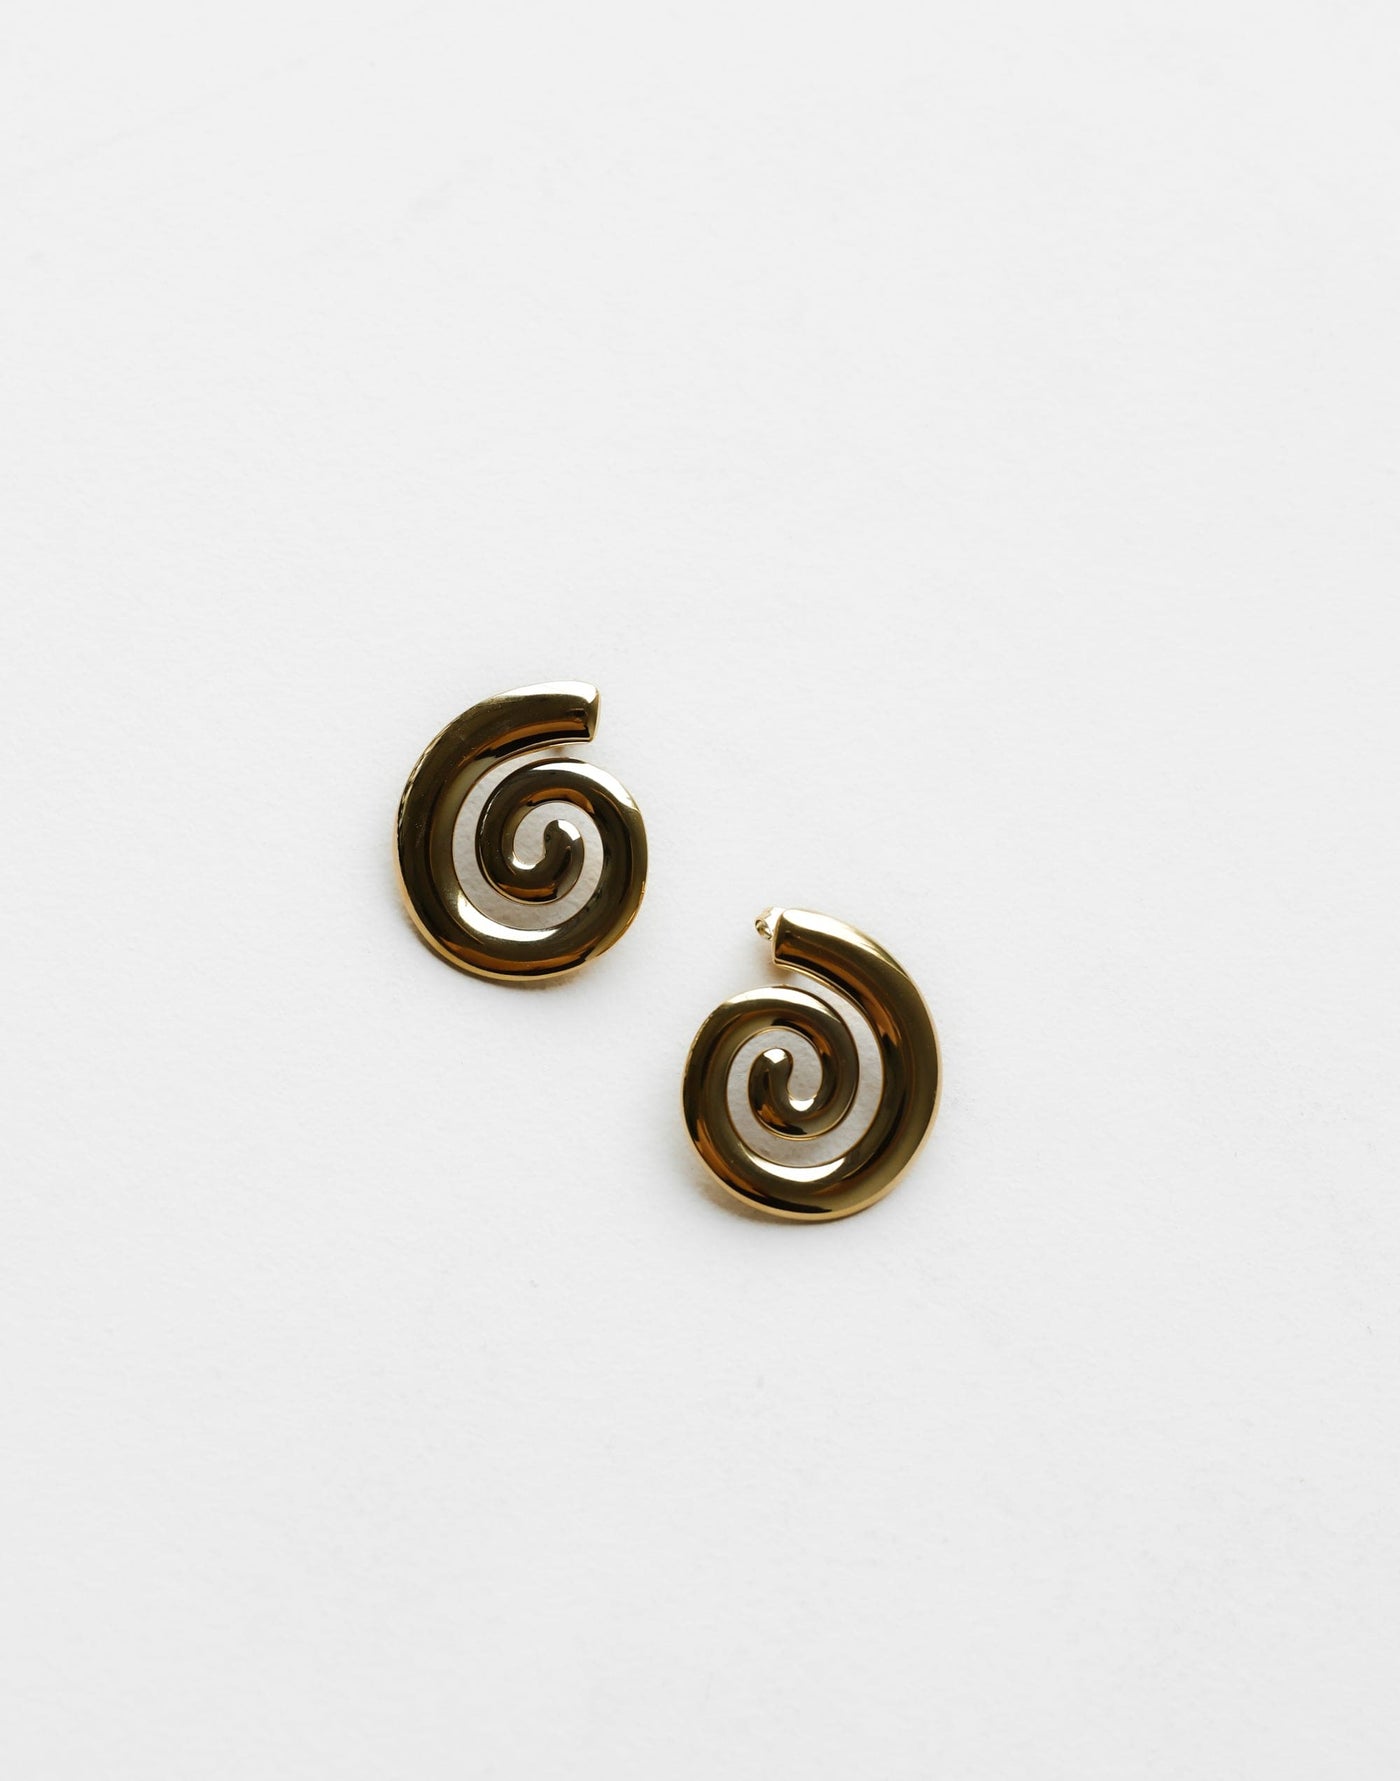 Janella Earrings (Gold) | CHARCOAL Exclusive - Spiral Style 18k Plated Stainless Steel Earrings - Women's Accessories - Charcoal Clothing